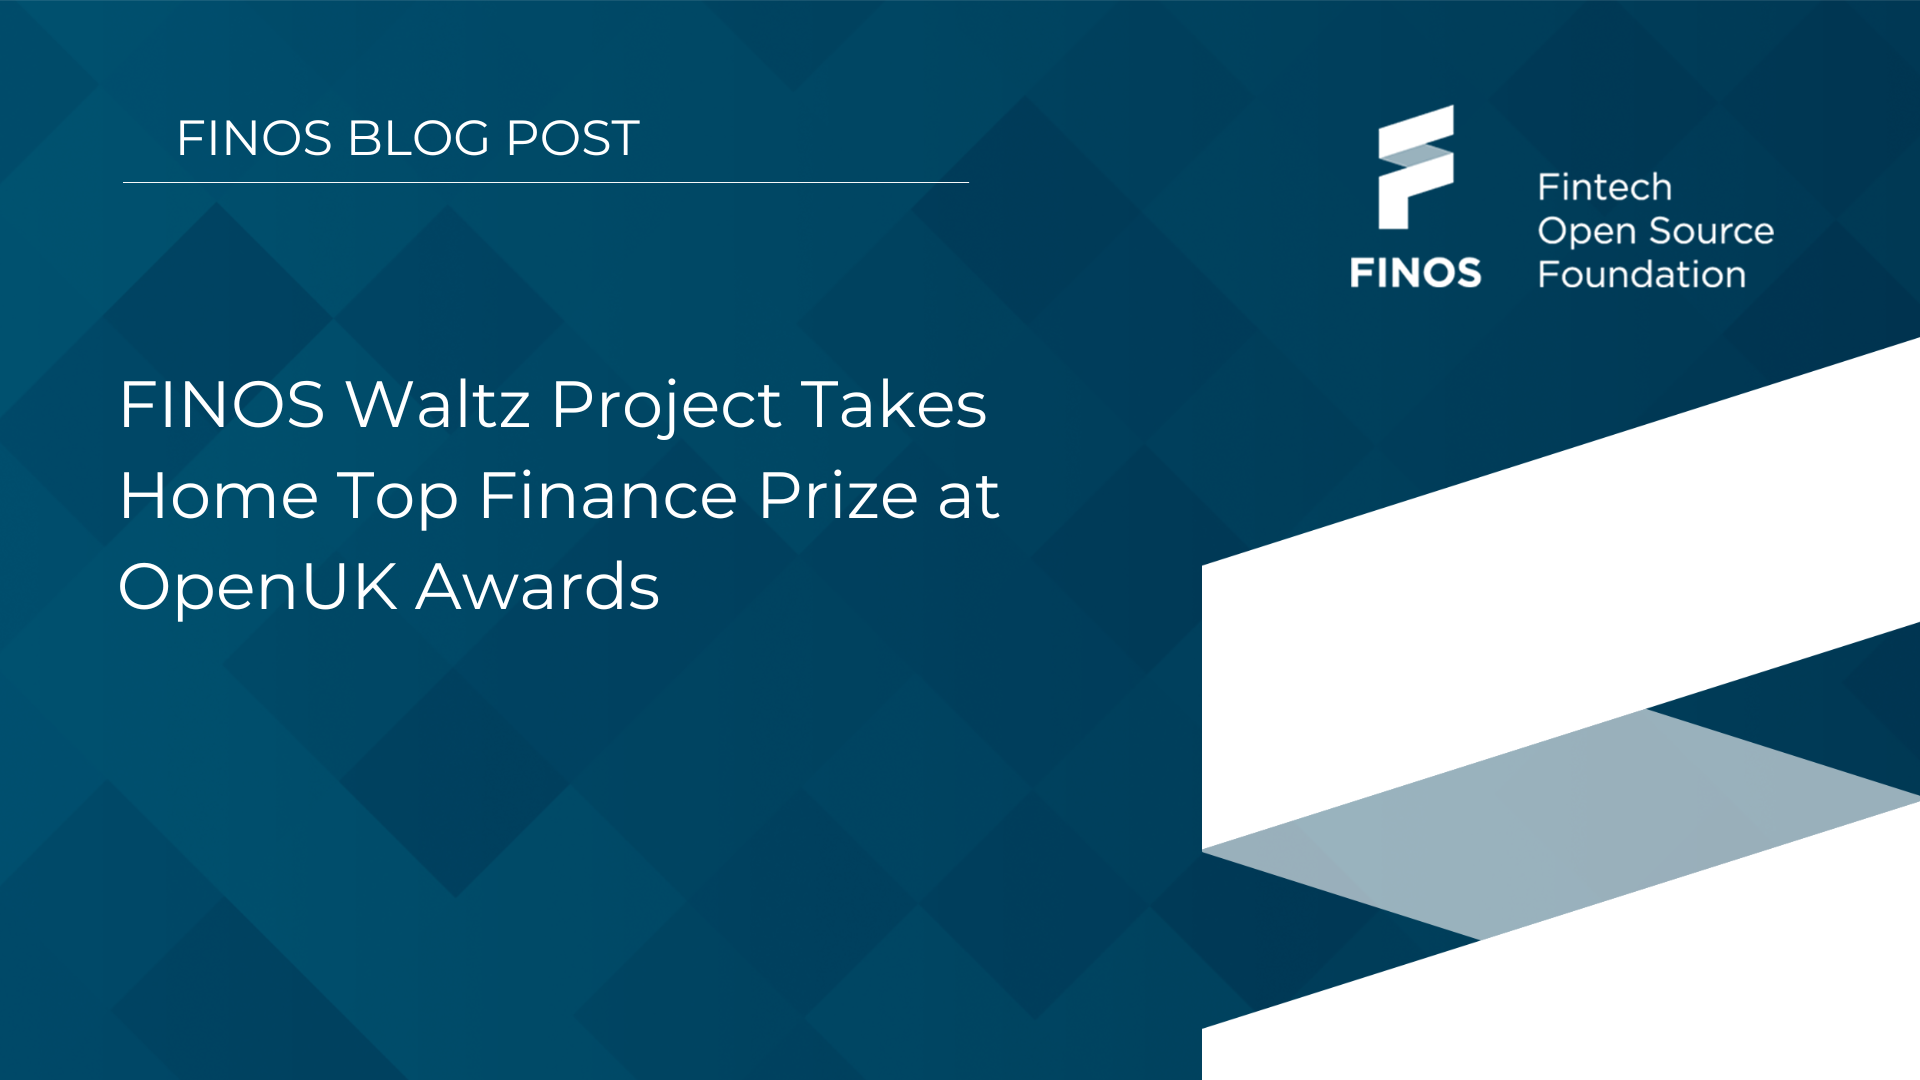 FINOS Waltz Project Takes Home Top Finance Prize at OpenUK Awards